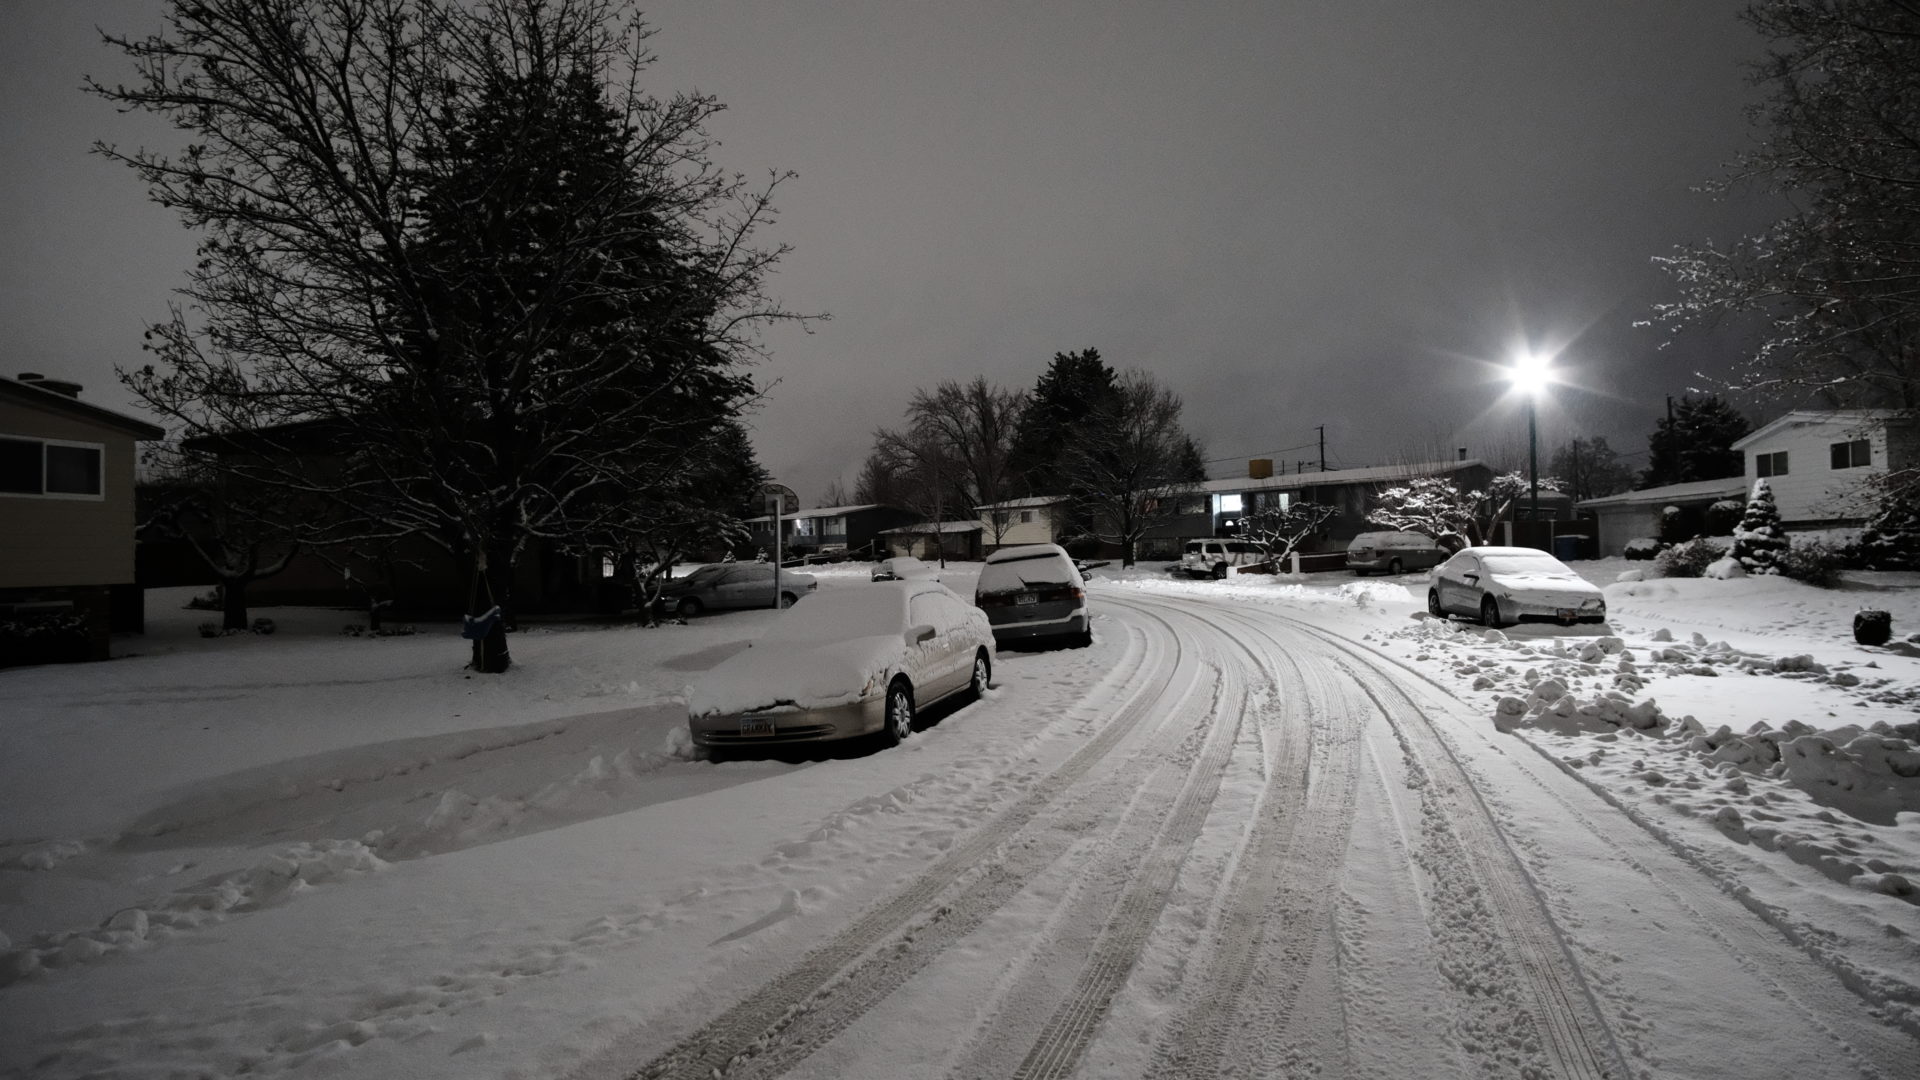 A snow covered street early in the morning in Orem, Utah